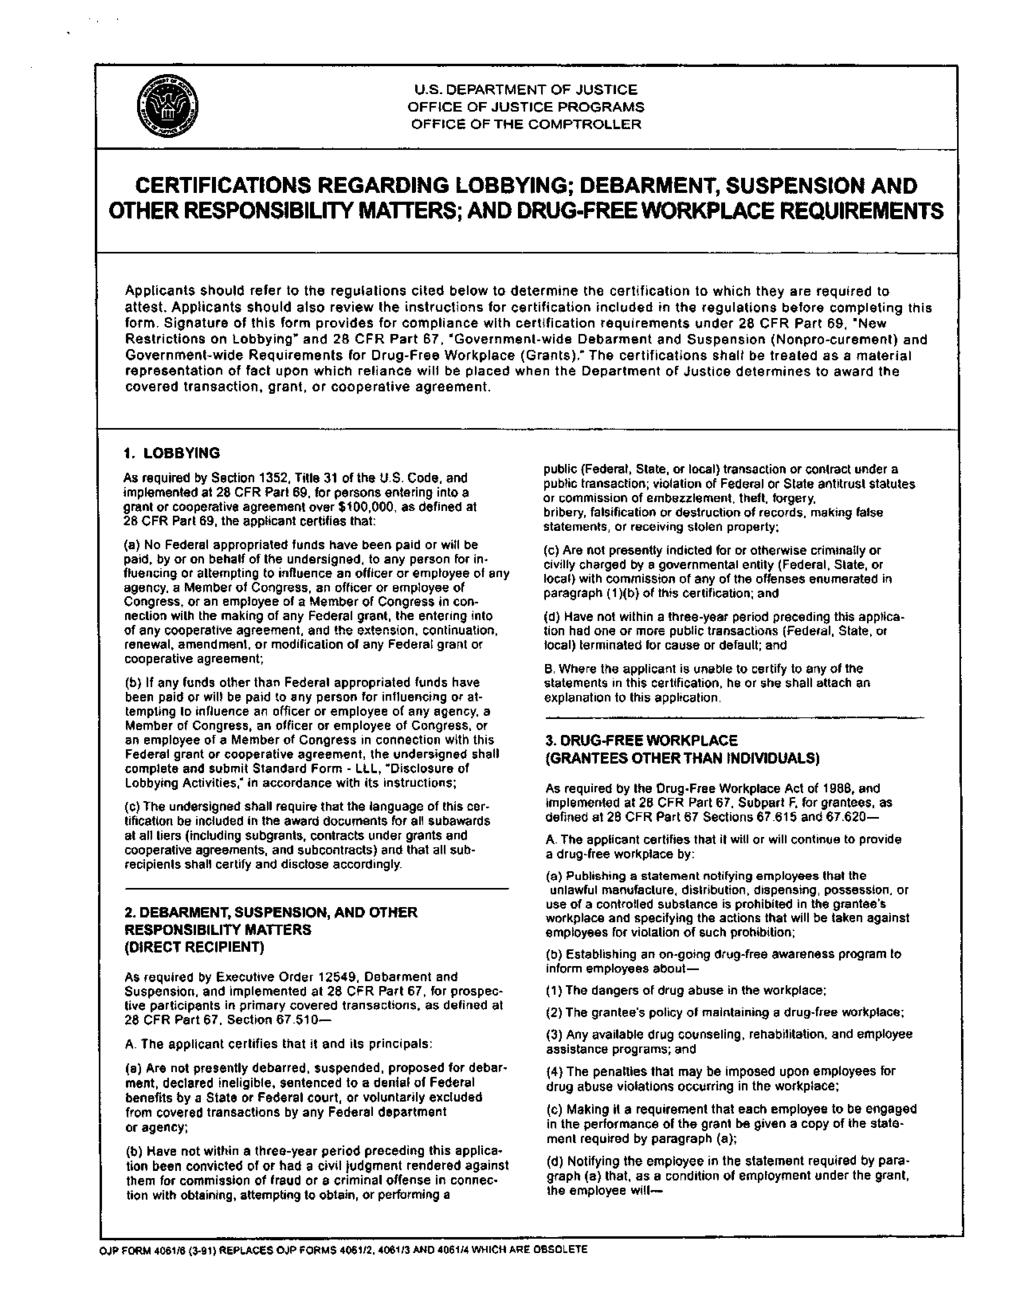 U.S. DEPARTMENT OF JUSTICE OFFICE OF JUSTICE PROGRAMS OFFICE OF THE COMPTROLLER CERTIFICATIONS REGARDING LOBBYING; DEBARMENT, SUSPENSION AND OTHER RESPONSIBILITY MATTERS; AND DRUG-FREE WORKPLACE